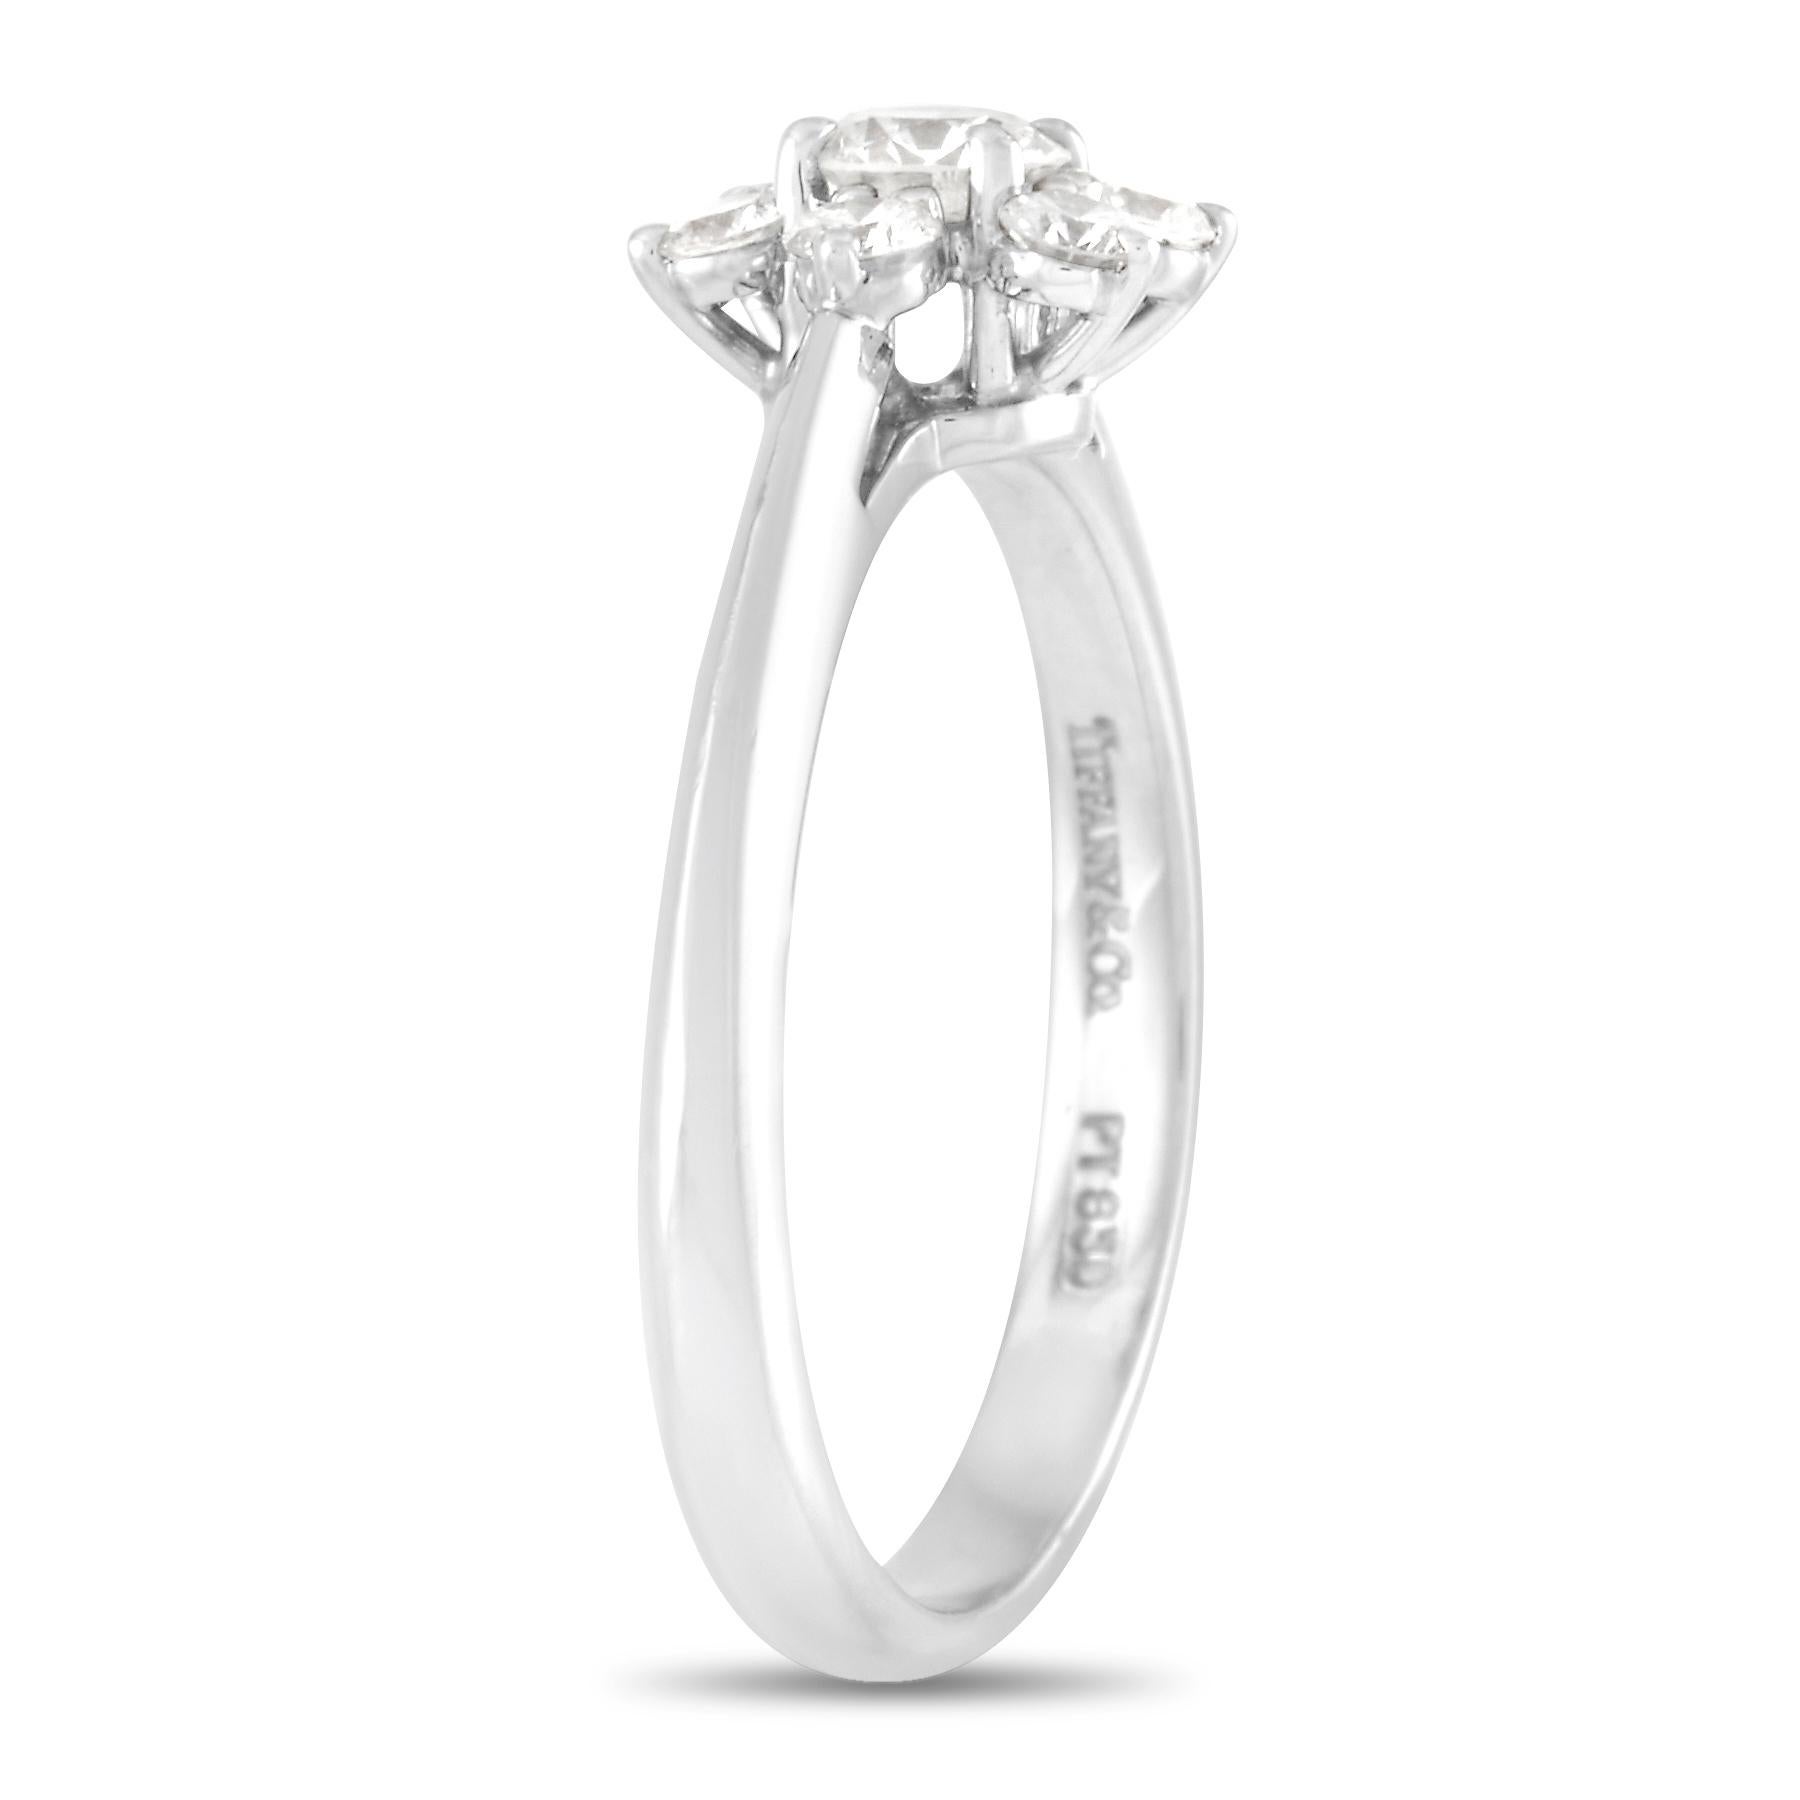 This Tiffany & Co Platinum 0.35 carat Diamond Halo Cocktail Ring is an elegant piece made with platinum to last the tests of time. The band is made with platinum and set with a total of 0.35 carats of round cut diamonds with a halo of smaller round